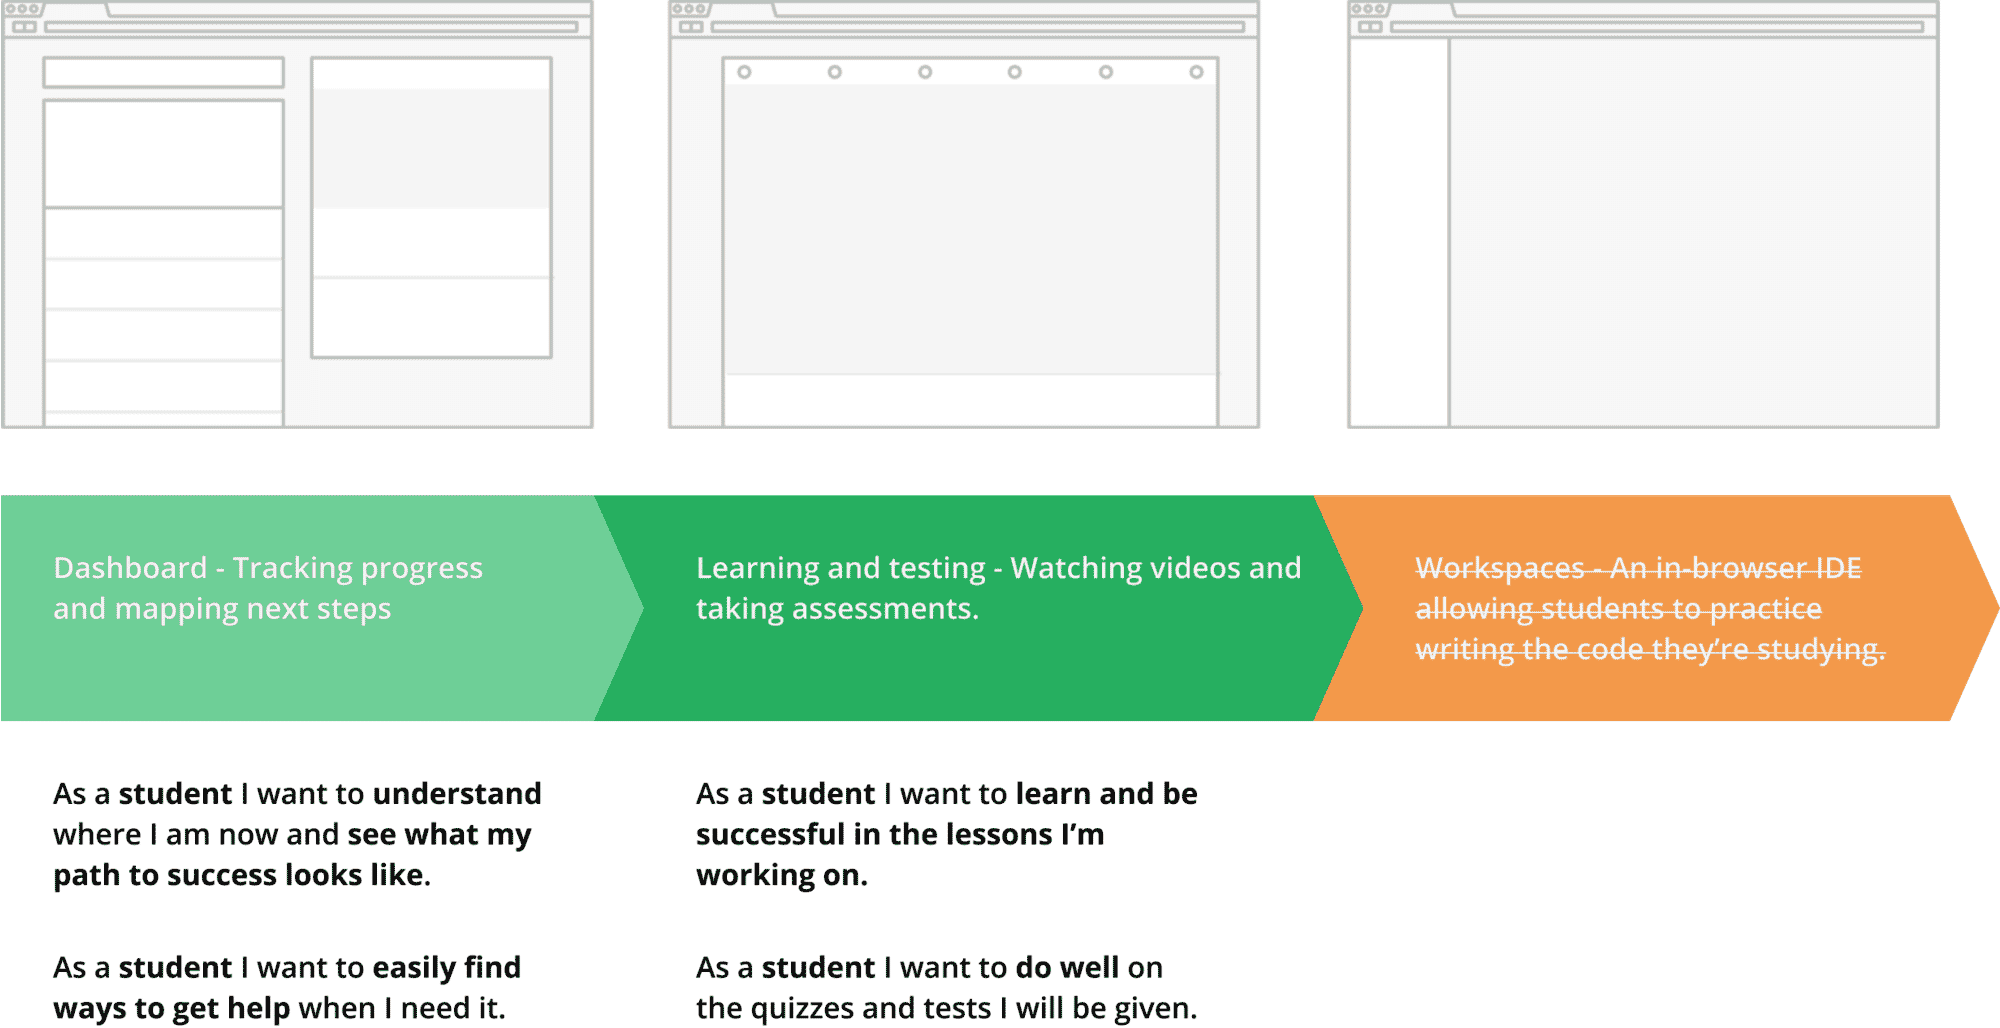 The student lifecycle - the dashboard, the learning space, and workspaces